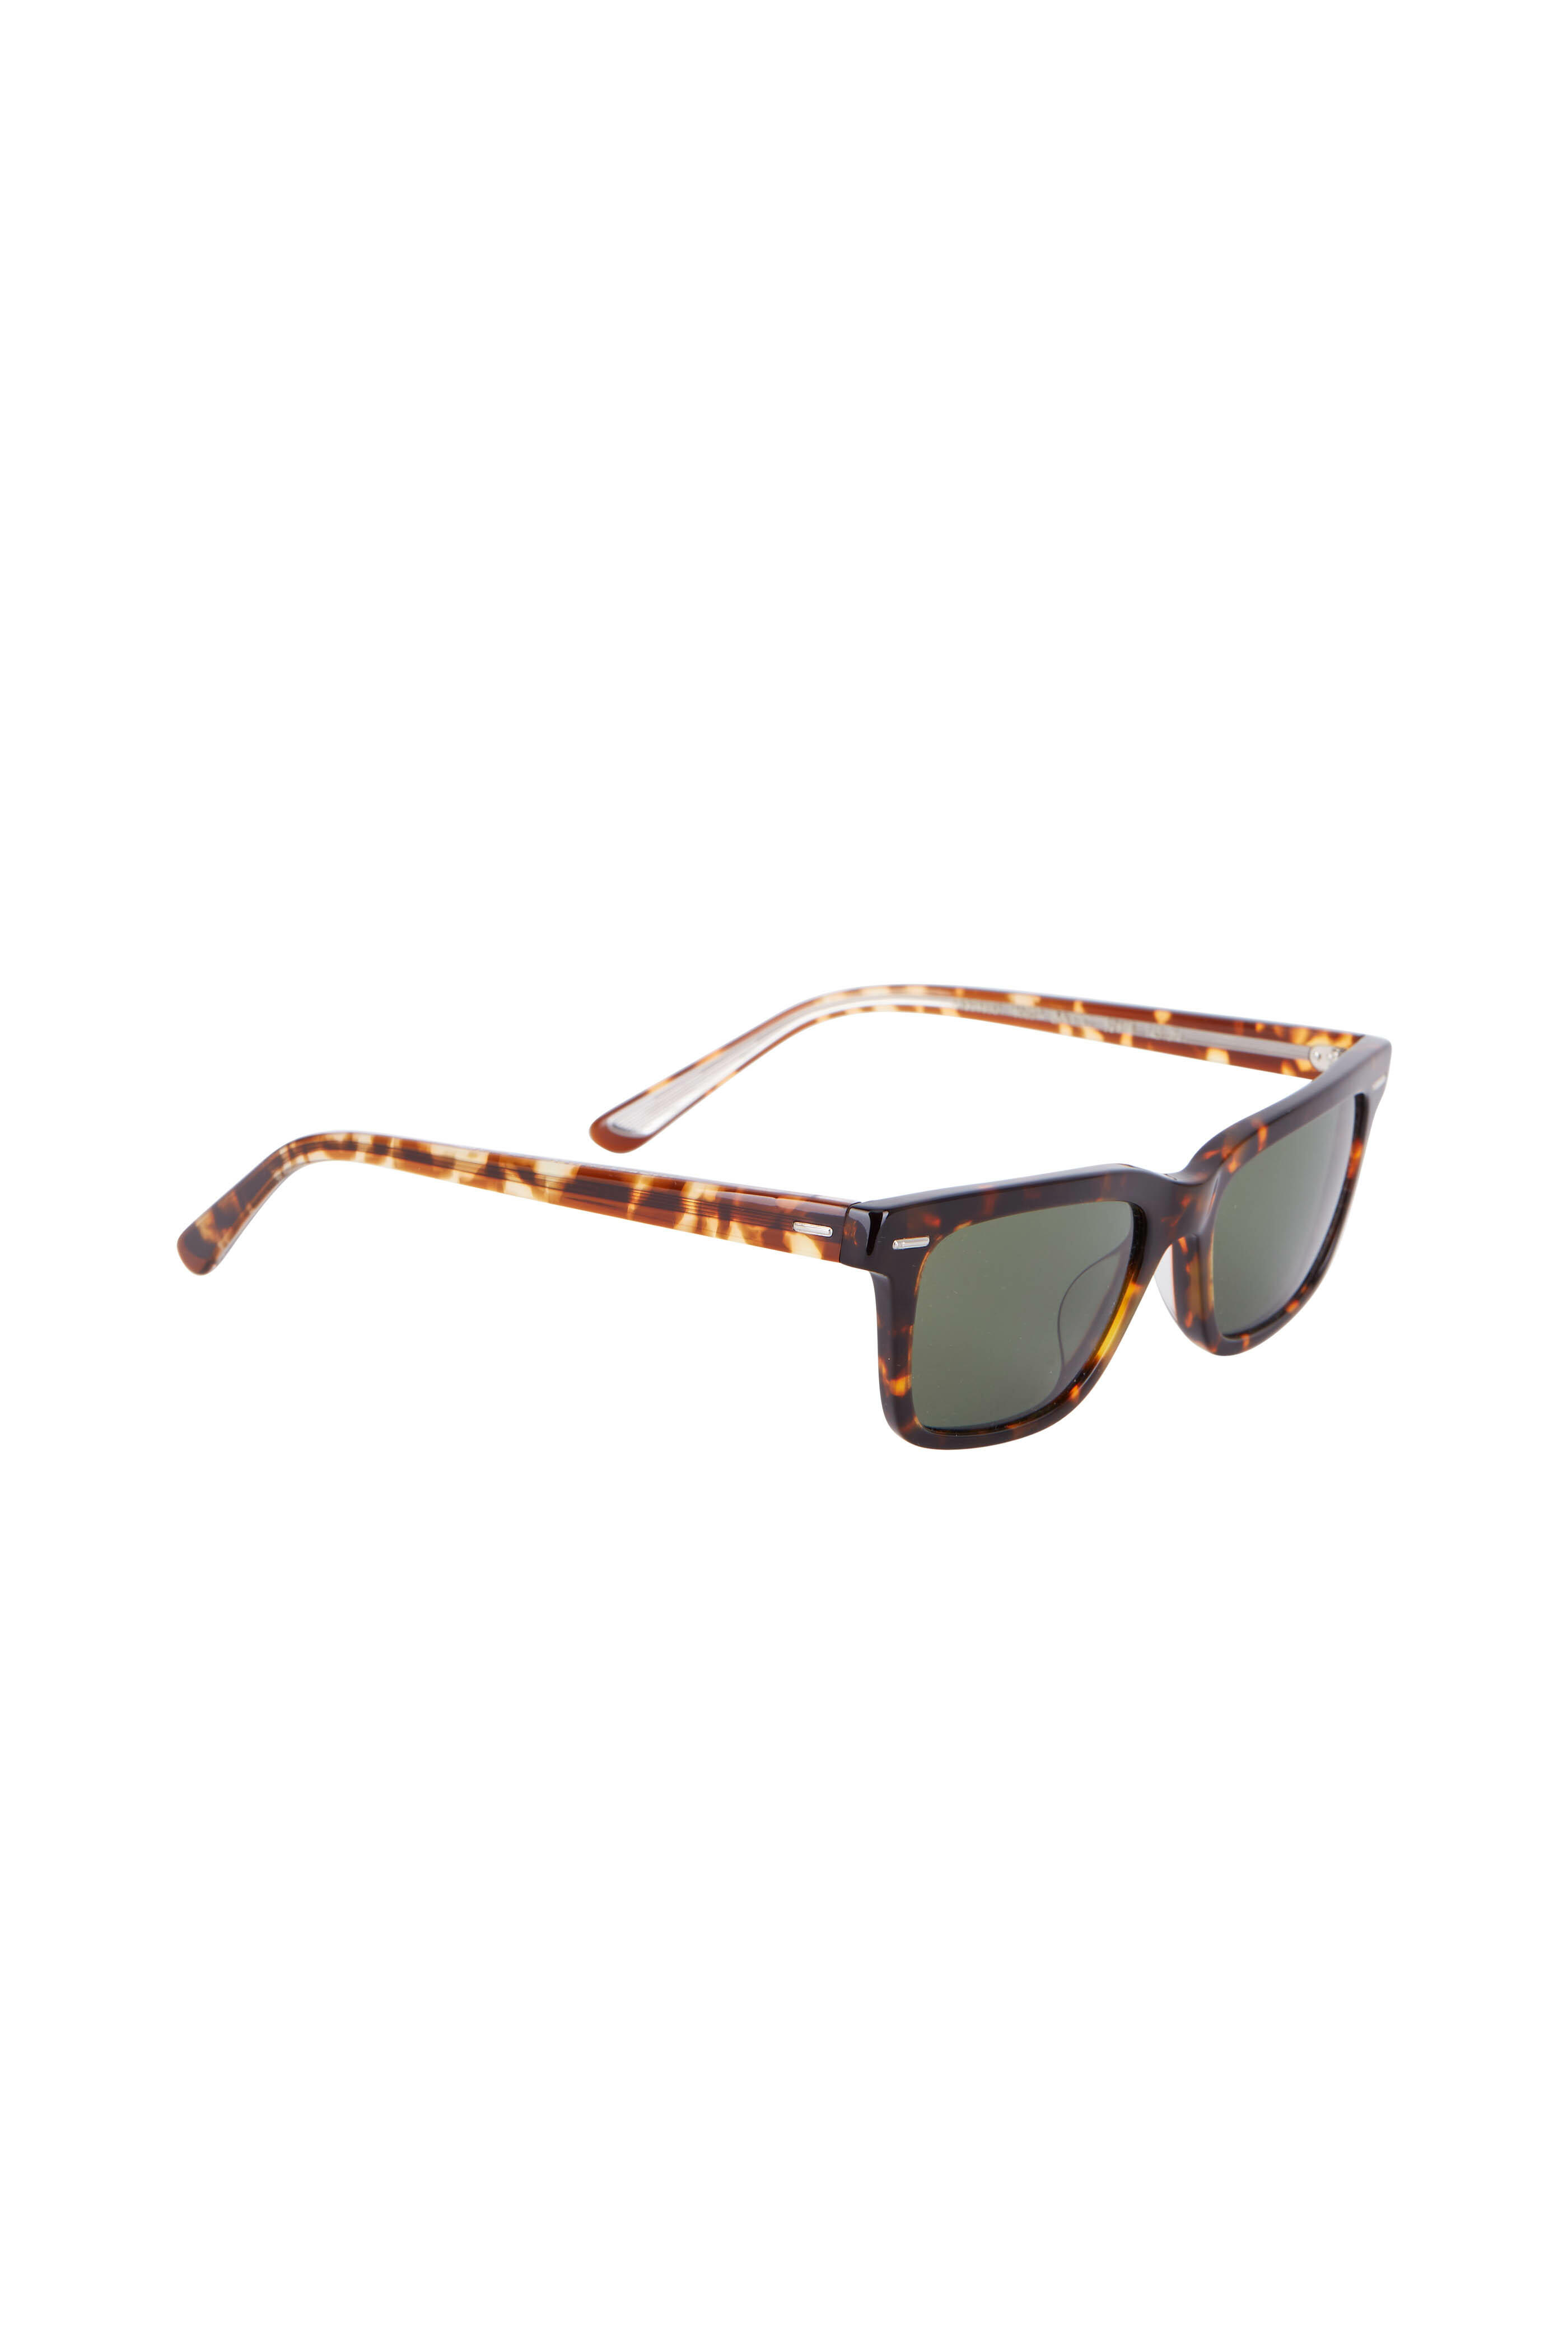 Oliver Peoples - The Row BA CC Tortoise D-Frame Sunglasses